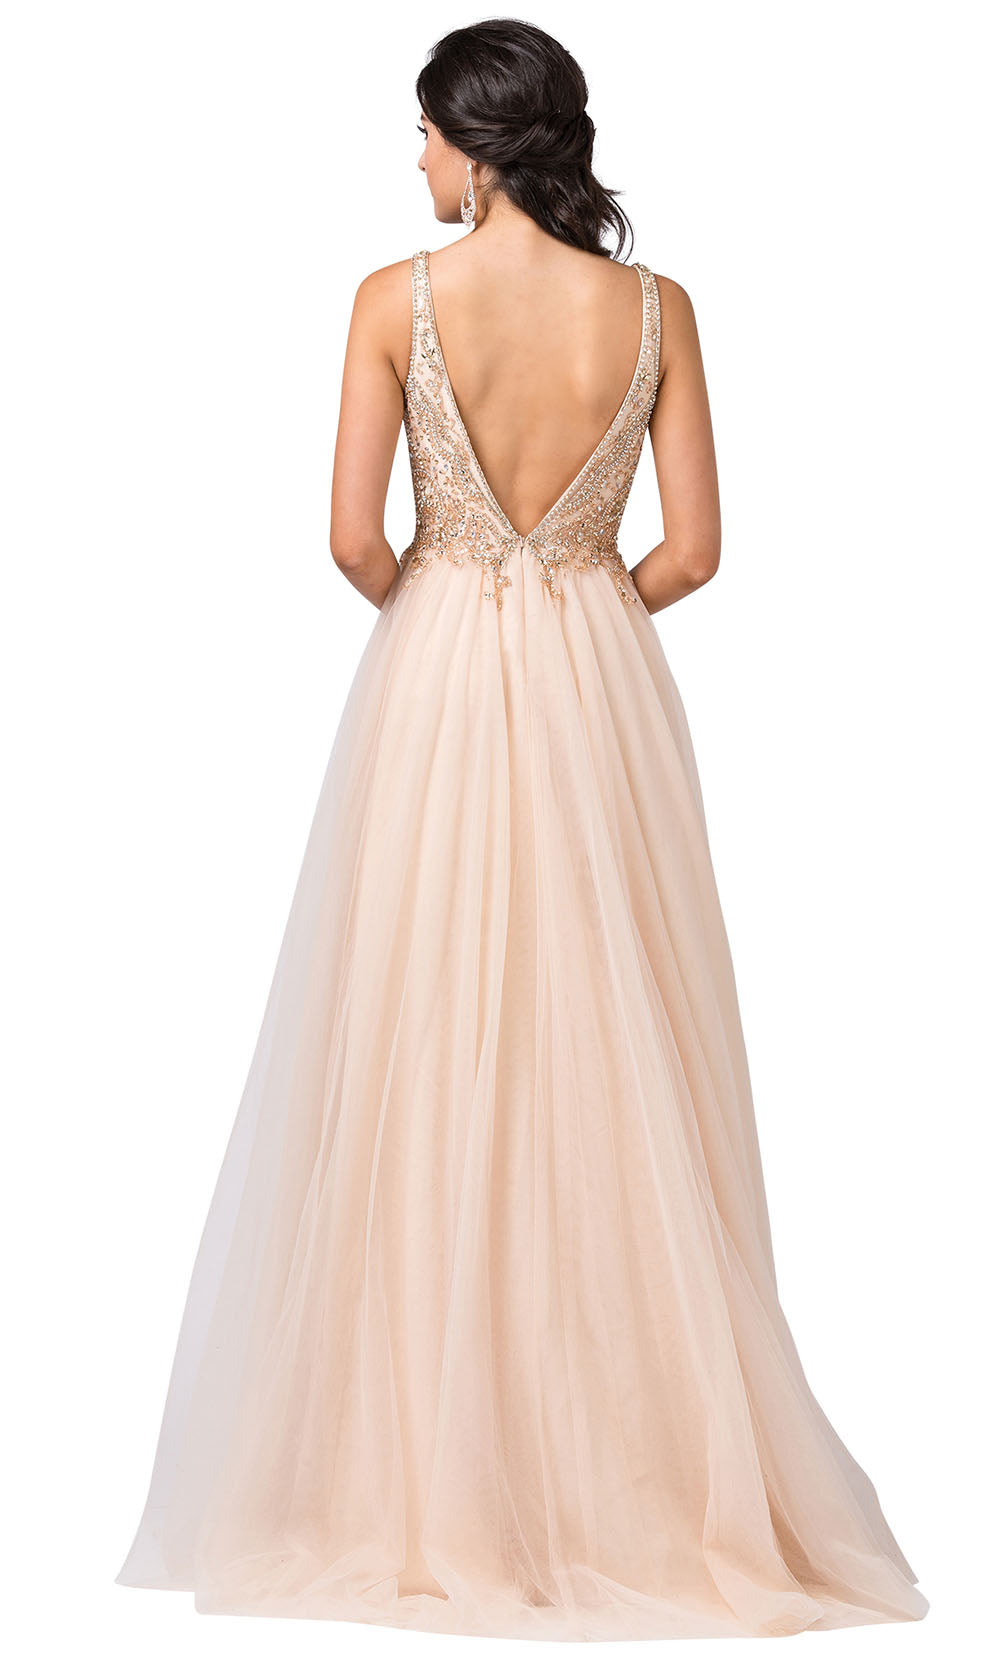 Dancing Queen - 2514 Beaded Plunging V-Neck A-Line Dress In Champagne & Gold